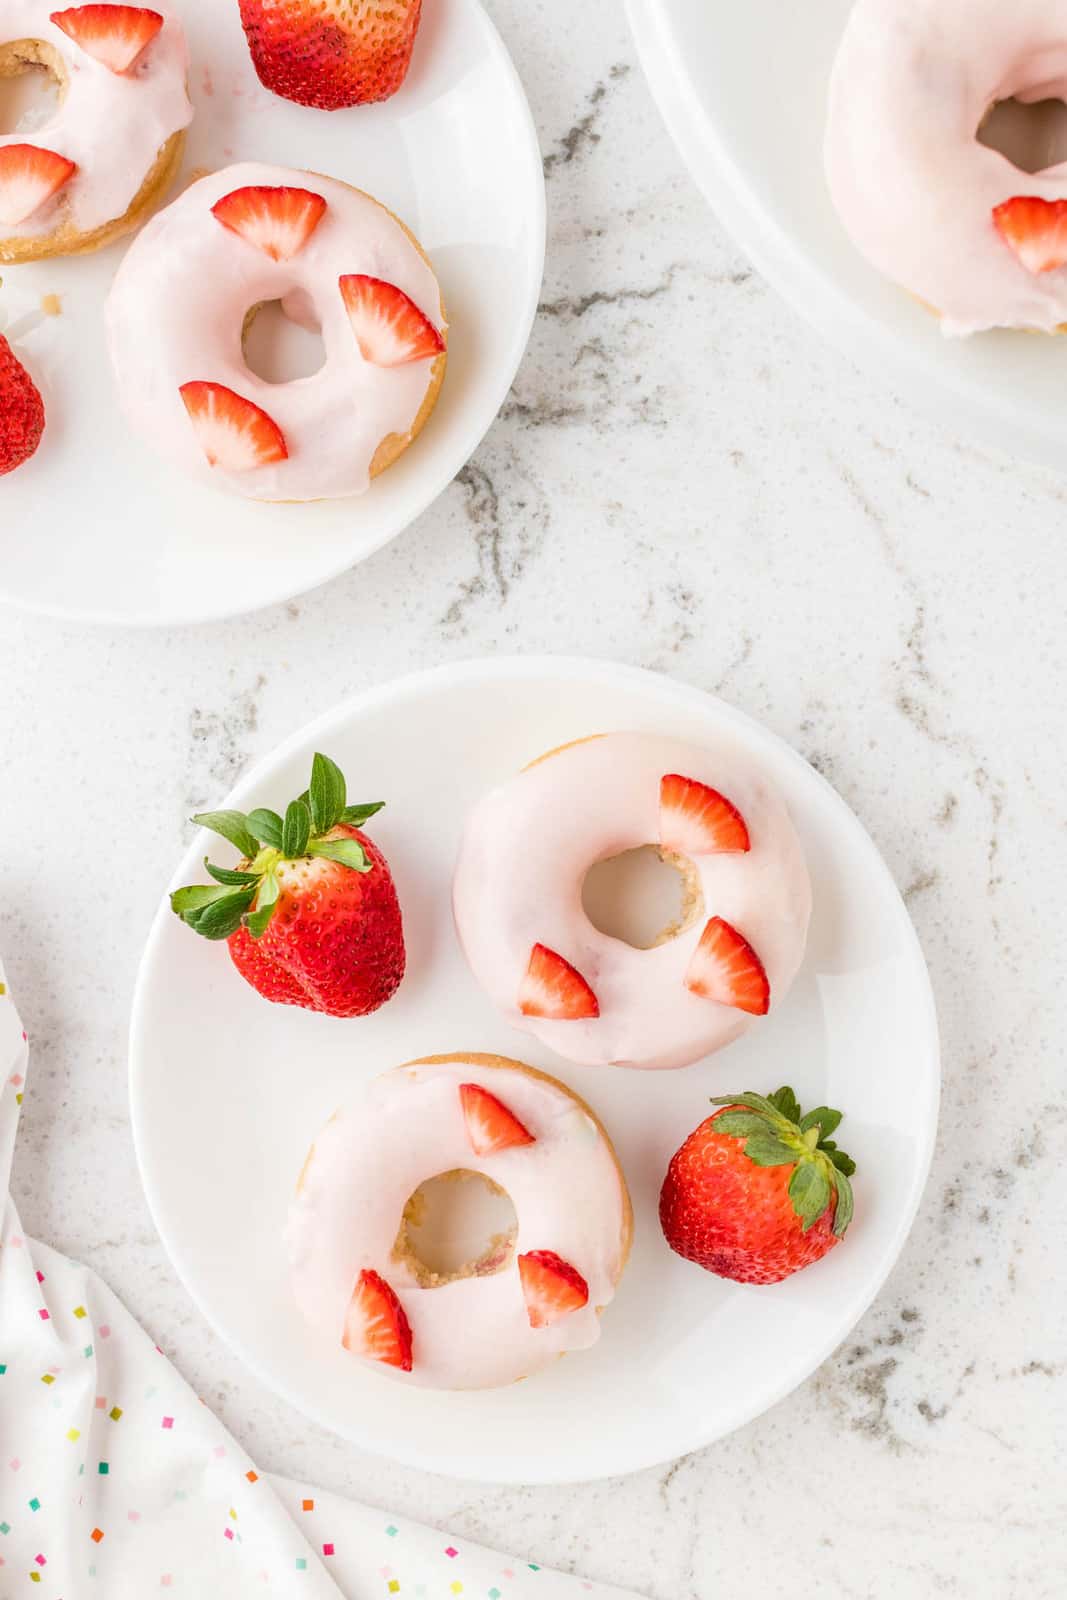 Overhead of two plates with Strawberry Donuts with slices of strawberry on them.